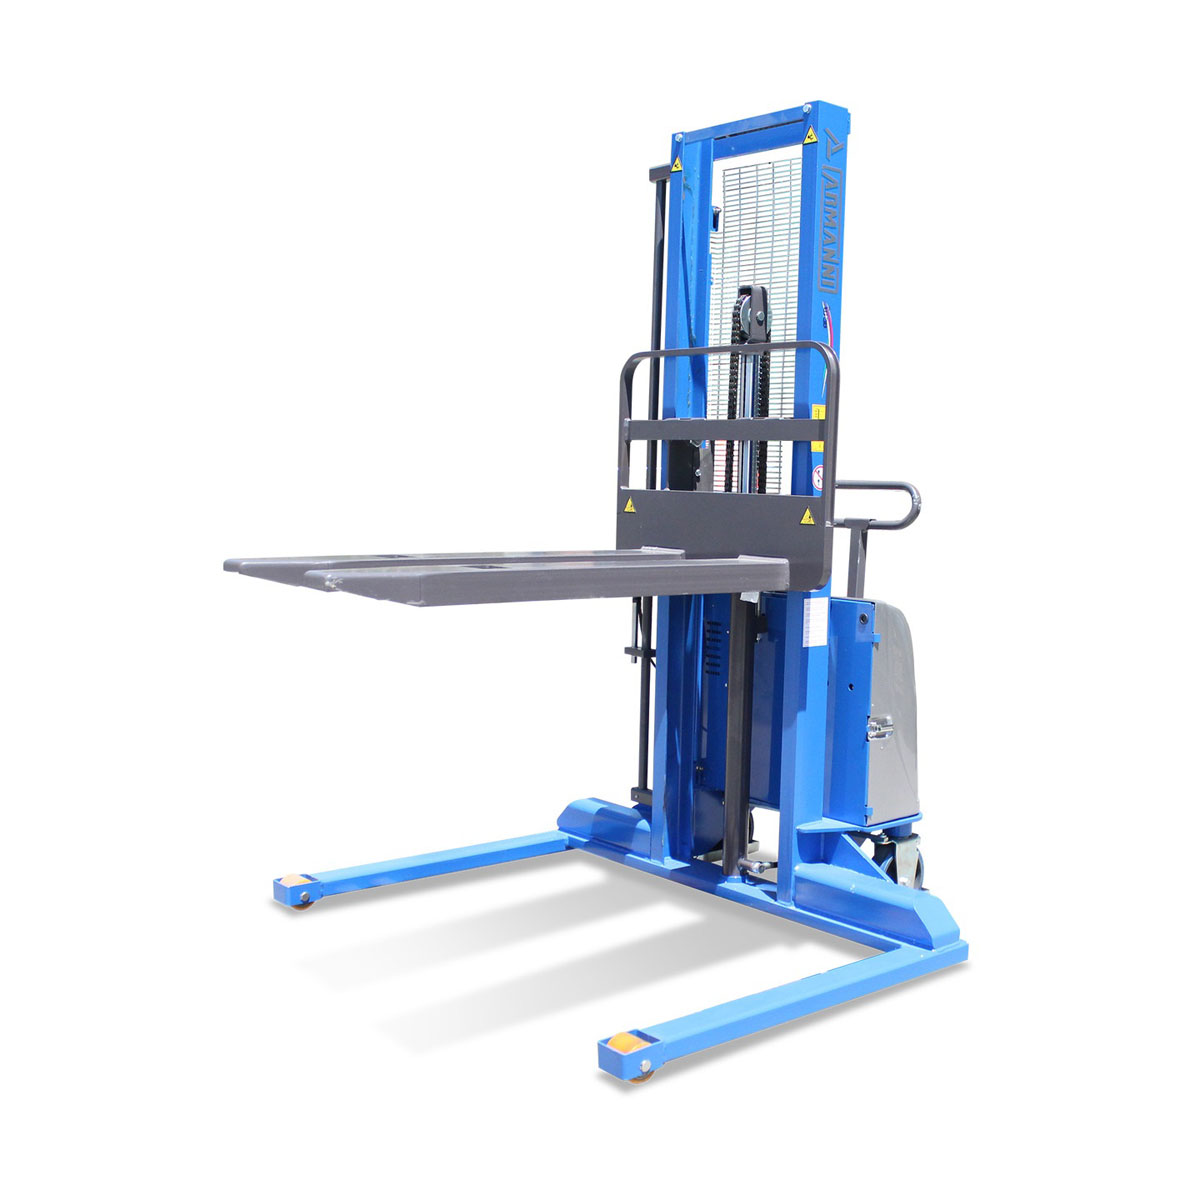 Buy Semi-Electric Straddle Stacker in Pallet Stackers from Armanni available at Astrolift NZ